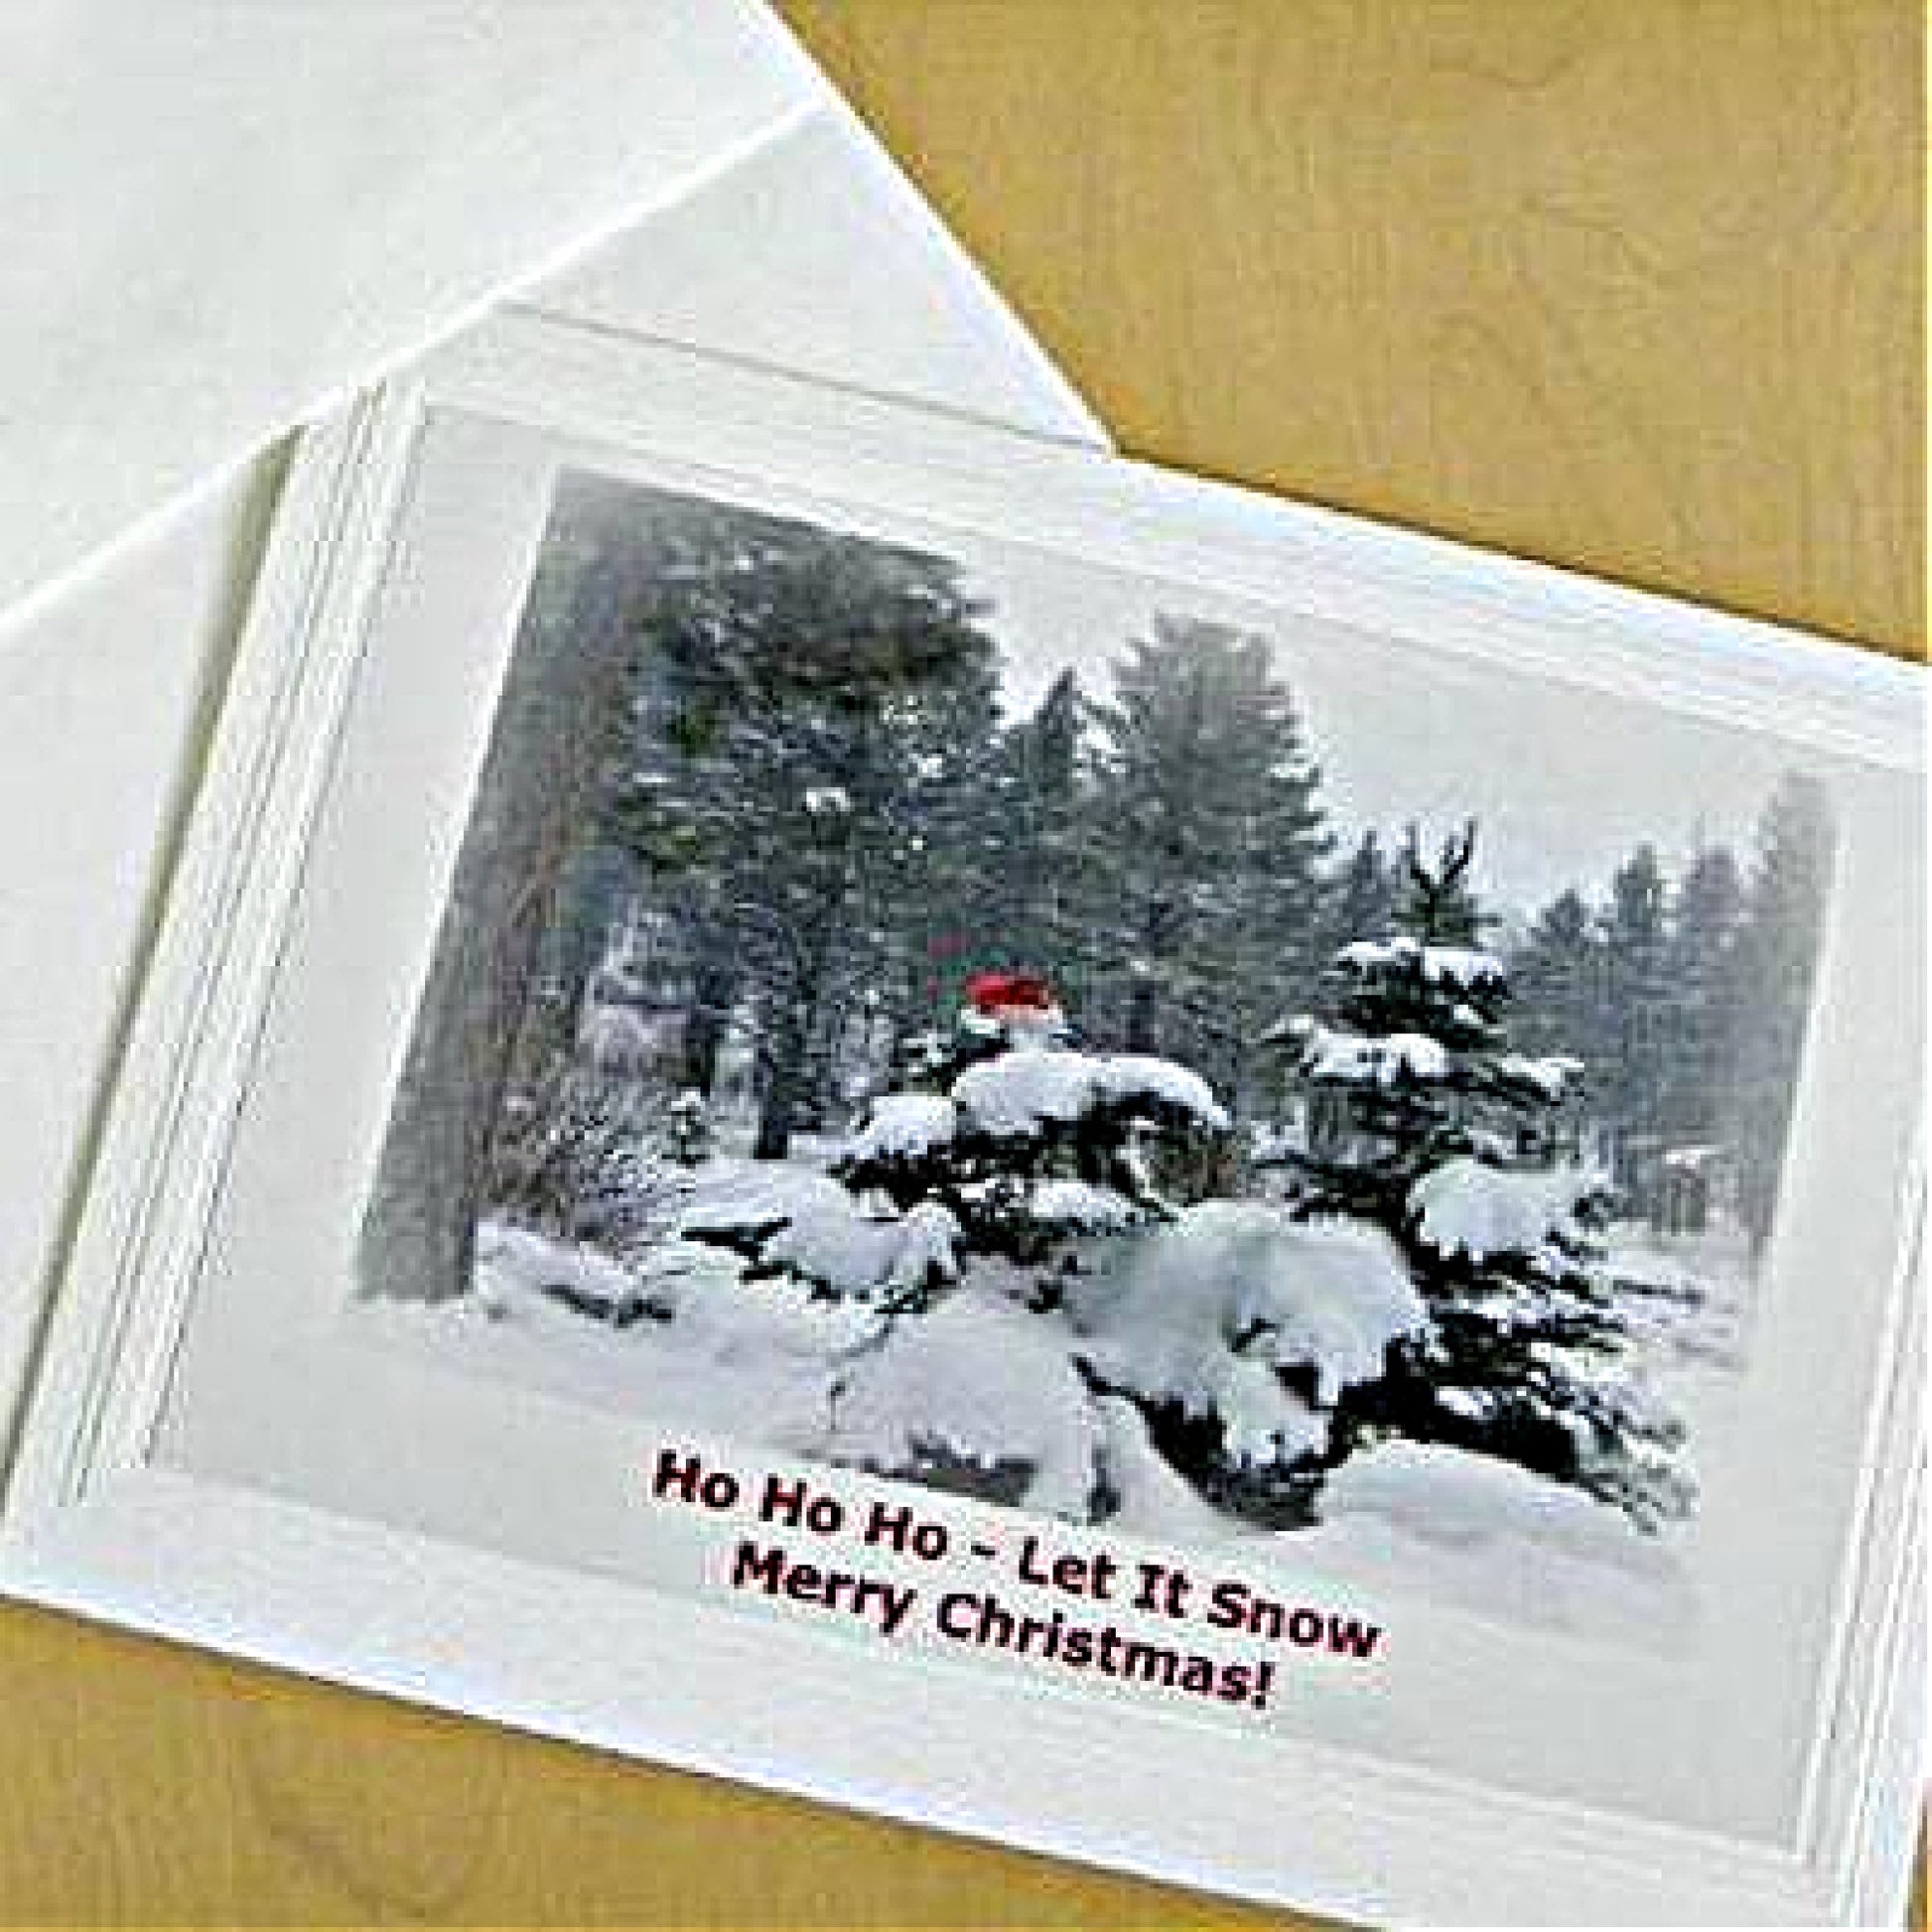 Photo of close up of single Greeting Card featuring a red Santa Hat on a snow-laden tree and a Holiday Greeting printed in red near the bottom